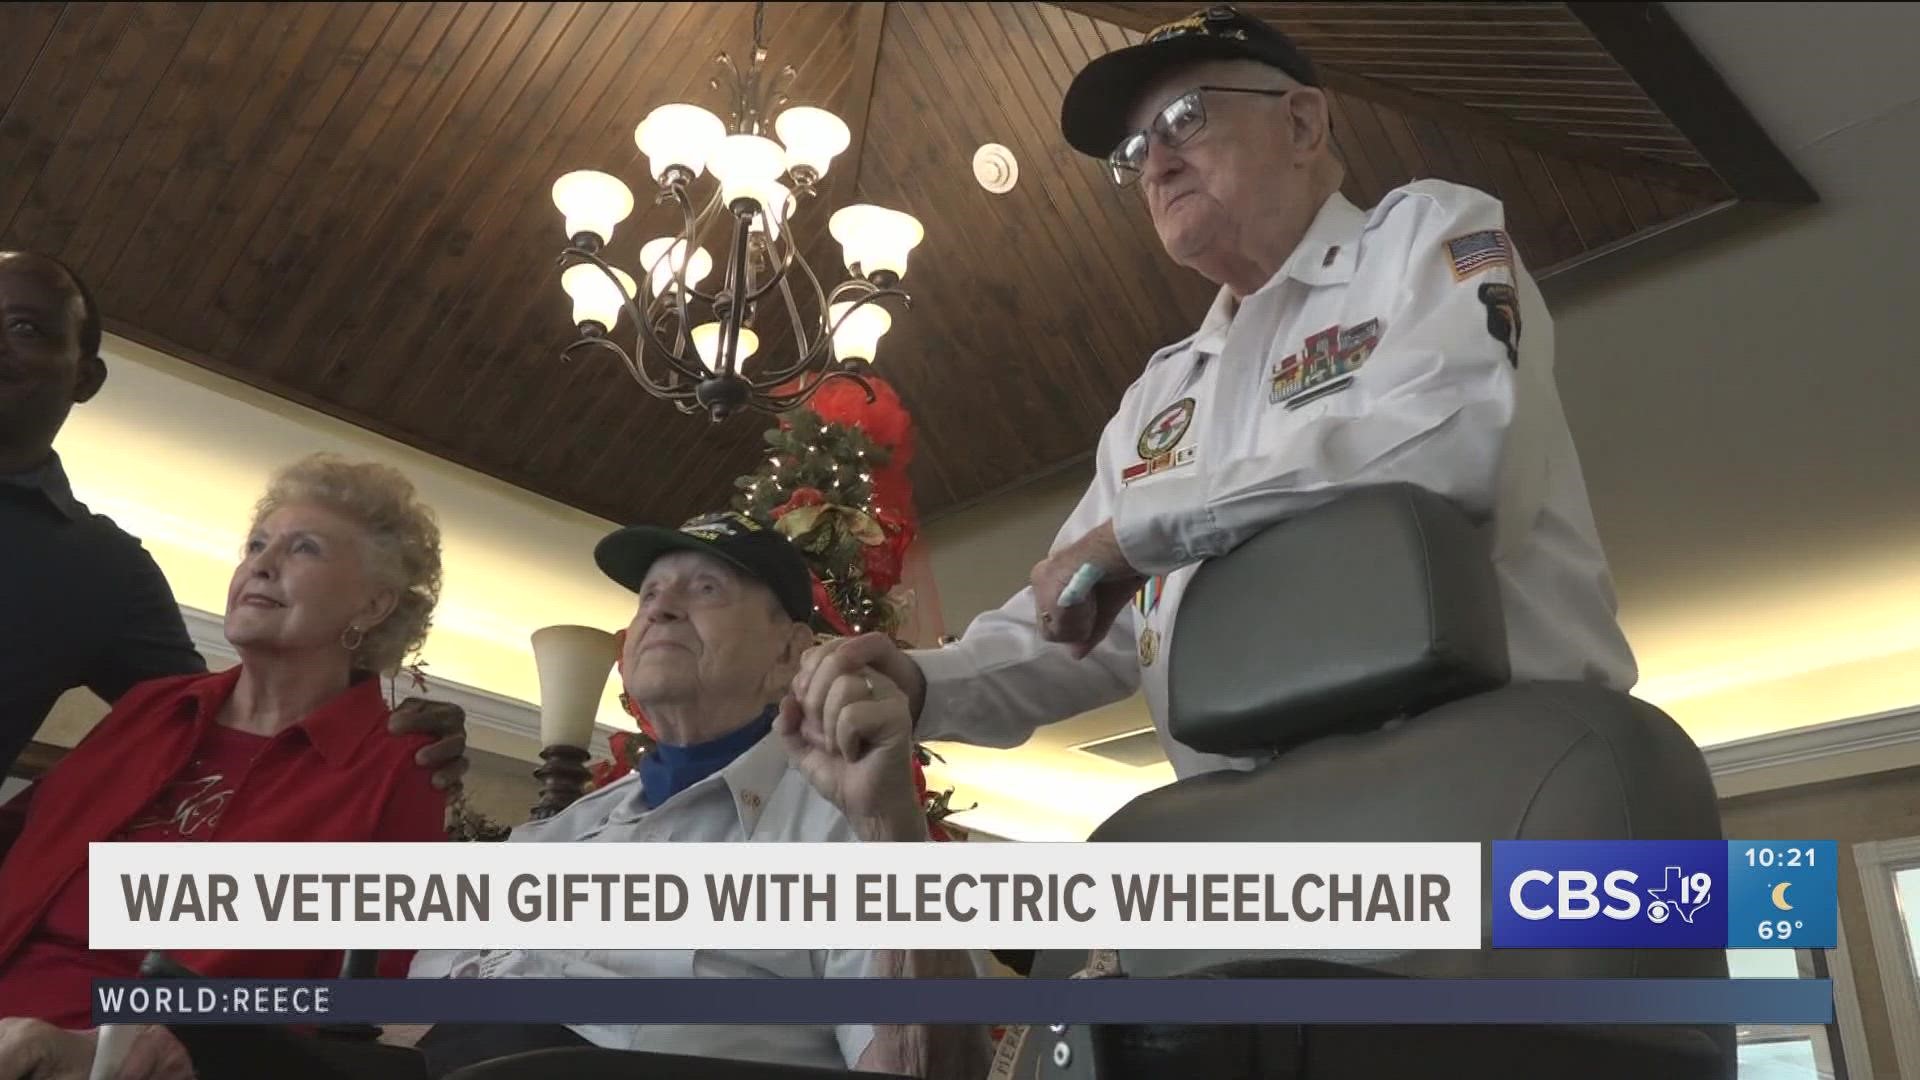 East Texan Leo Glover received an electric wheelchair from the American Legion Auxiliary of Tyler. Glover is a Korean and Vietnam war veteran.